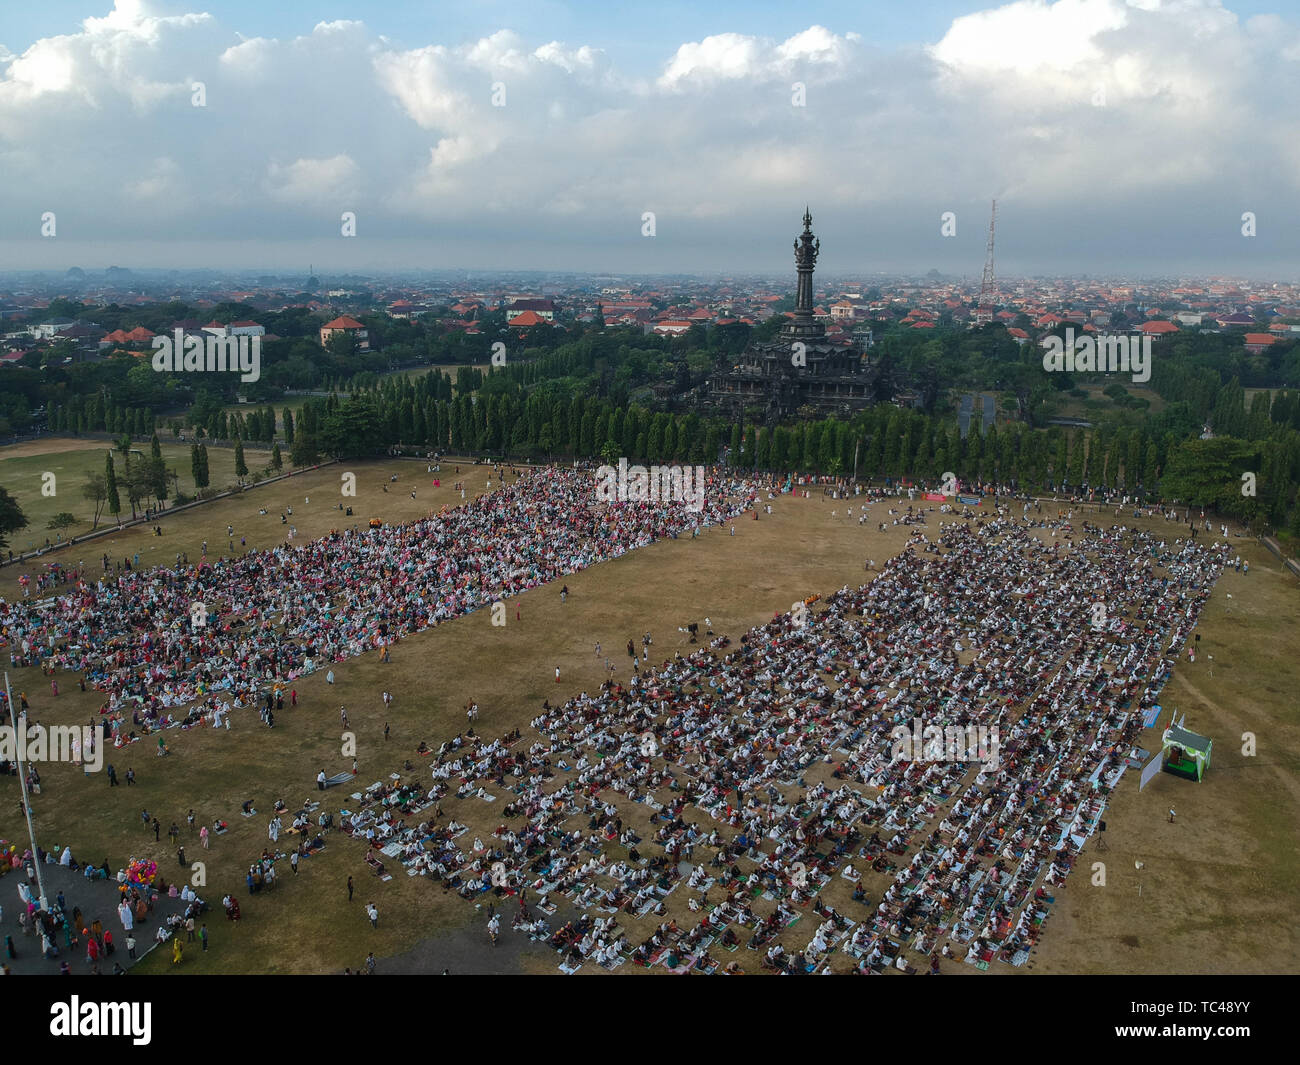 The view from the air of the Eid al-Fitr prayer in 2019 at Puputan Renon field. Eid prayers were attended by th Stock Photo